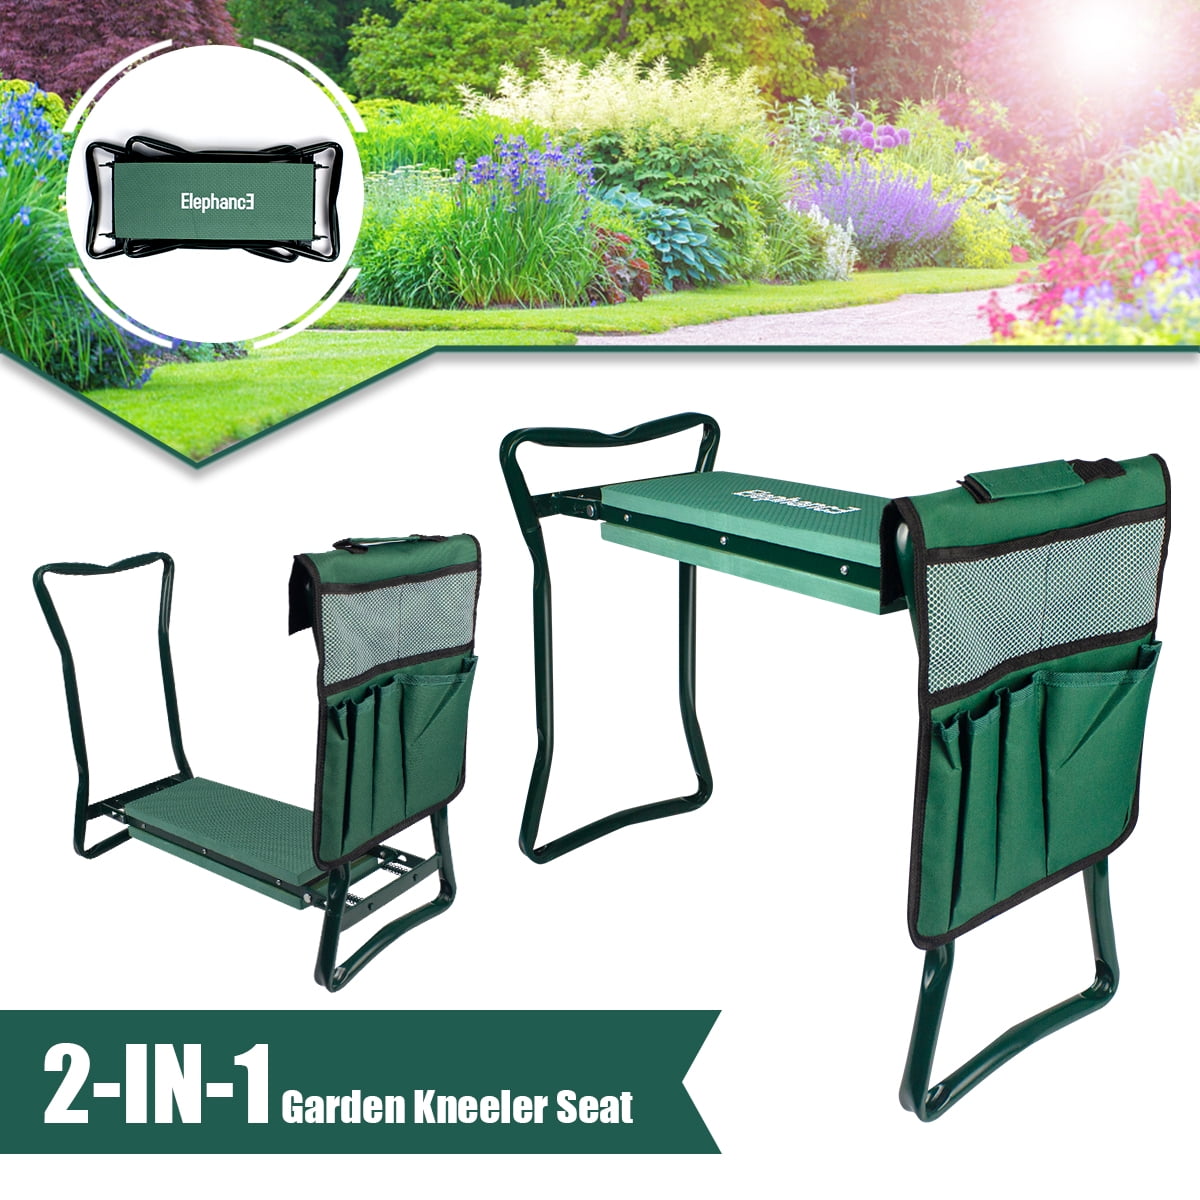 Green Garden Kneeler Sturdy Foldable Portable Bearing 150KG Heavy Duty Stool Gardening Soft Lightweight Protects Knees Outdoor EVA Foam Pad with Tool Pouch Multifunctional Seat